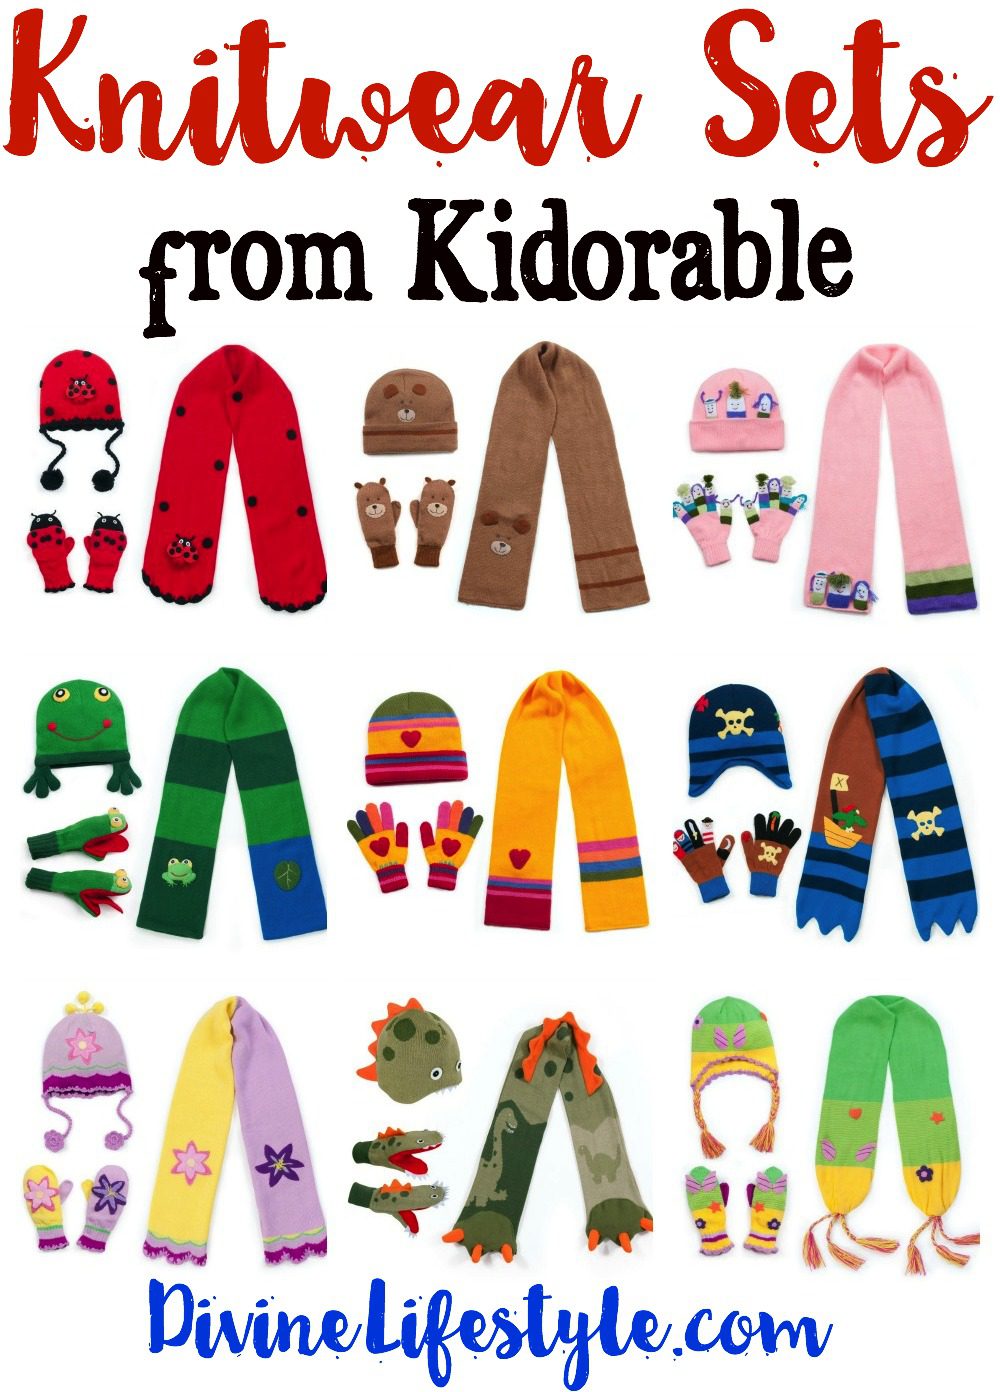 Knitwear Sets from Kidorable